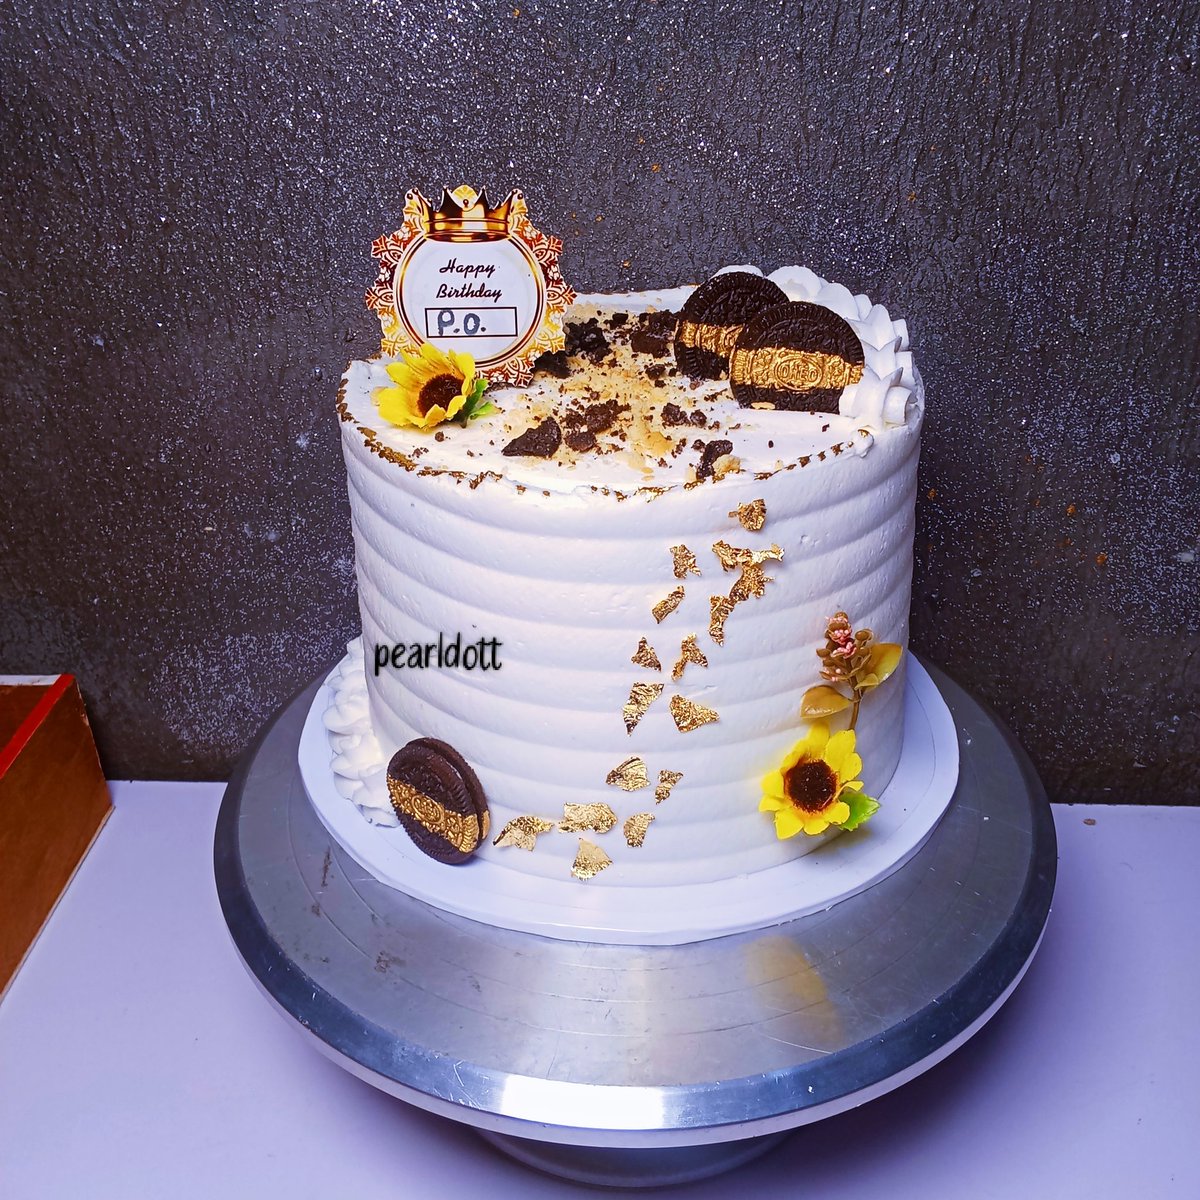 We sent this as a Suprise to a lovely lady....

Paired with a sumptuous food tray..

Want something like this.
Click the link in my bio.
✍️Cakediva.

#pearldott #suprisesinasaba #foodtrayinasaba #smallchopsinasaba #asababaker #cakesinasaba #foodtrays #eventplanning #eventdecor